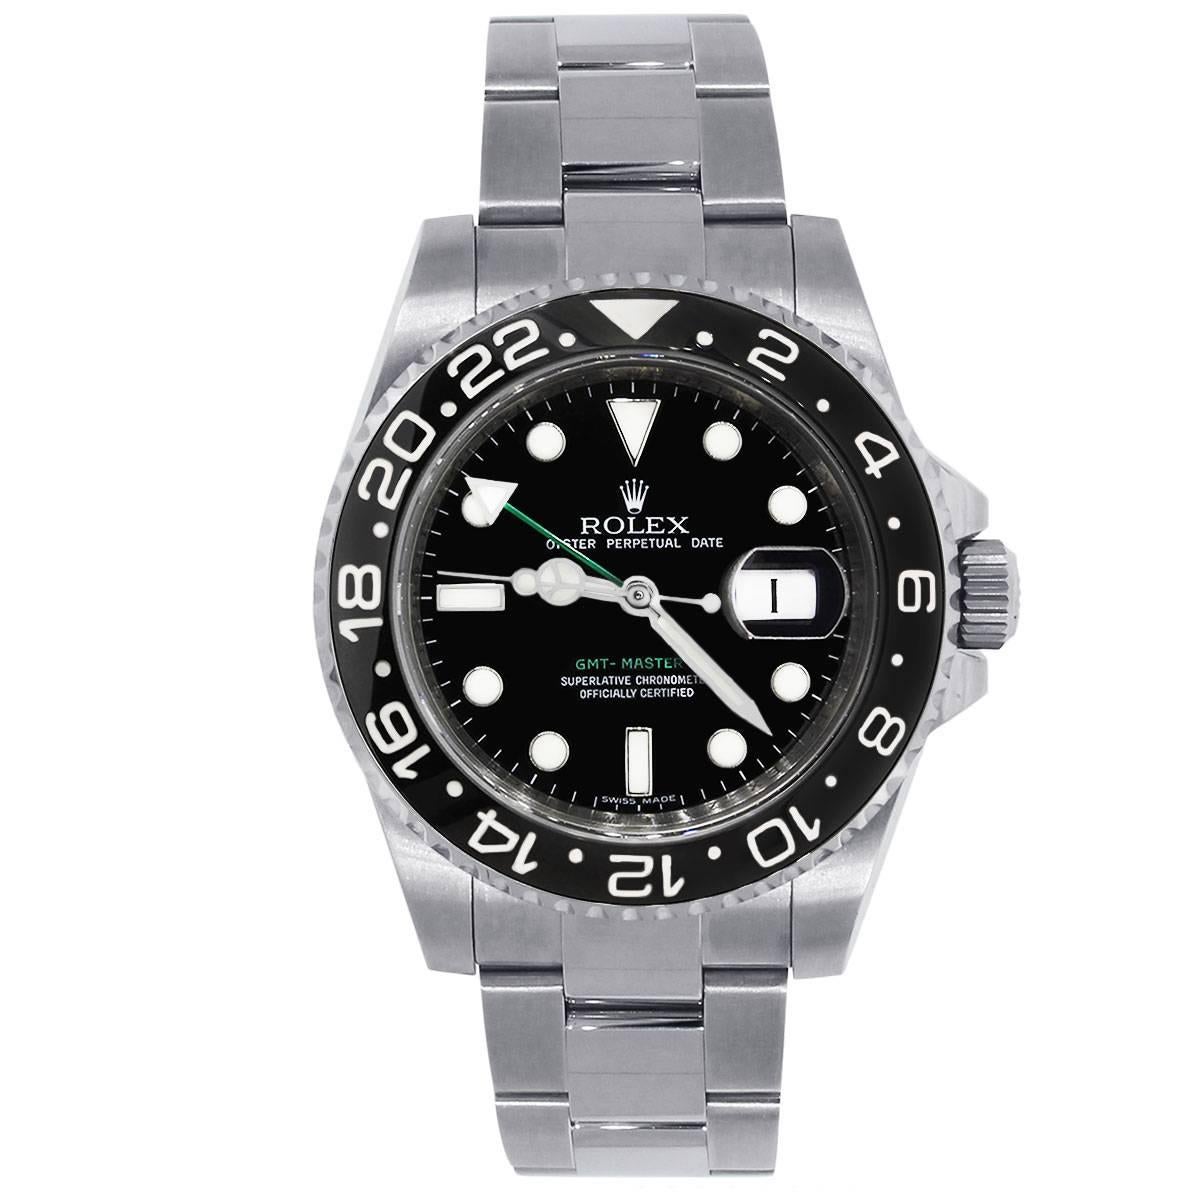 Brand: Rolex
MPN: GMT Master II
Model: 116170
Case Material: Stainless Steel
Case Diameter: 40 mm
Crystal: Scratch resistant sapphire crystal
Bezel: Stainless steel black bidirectional rotating ceramic bezel with inner engraving.
Dial: Black dial